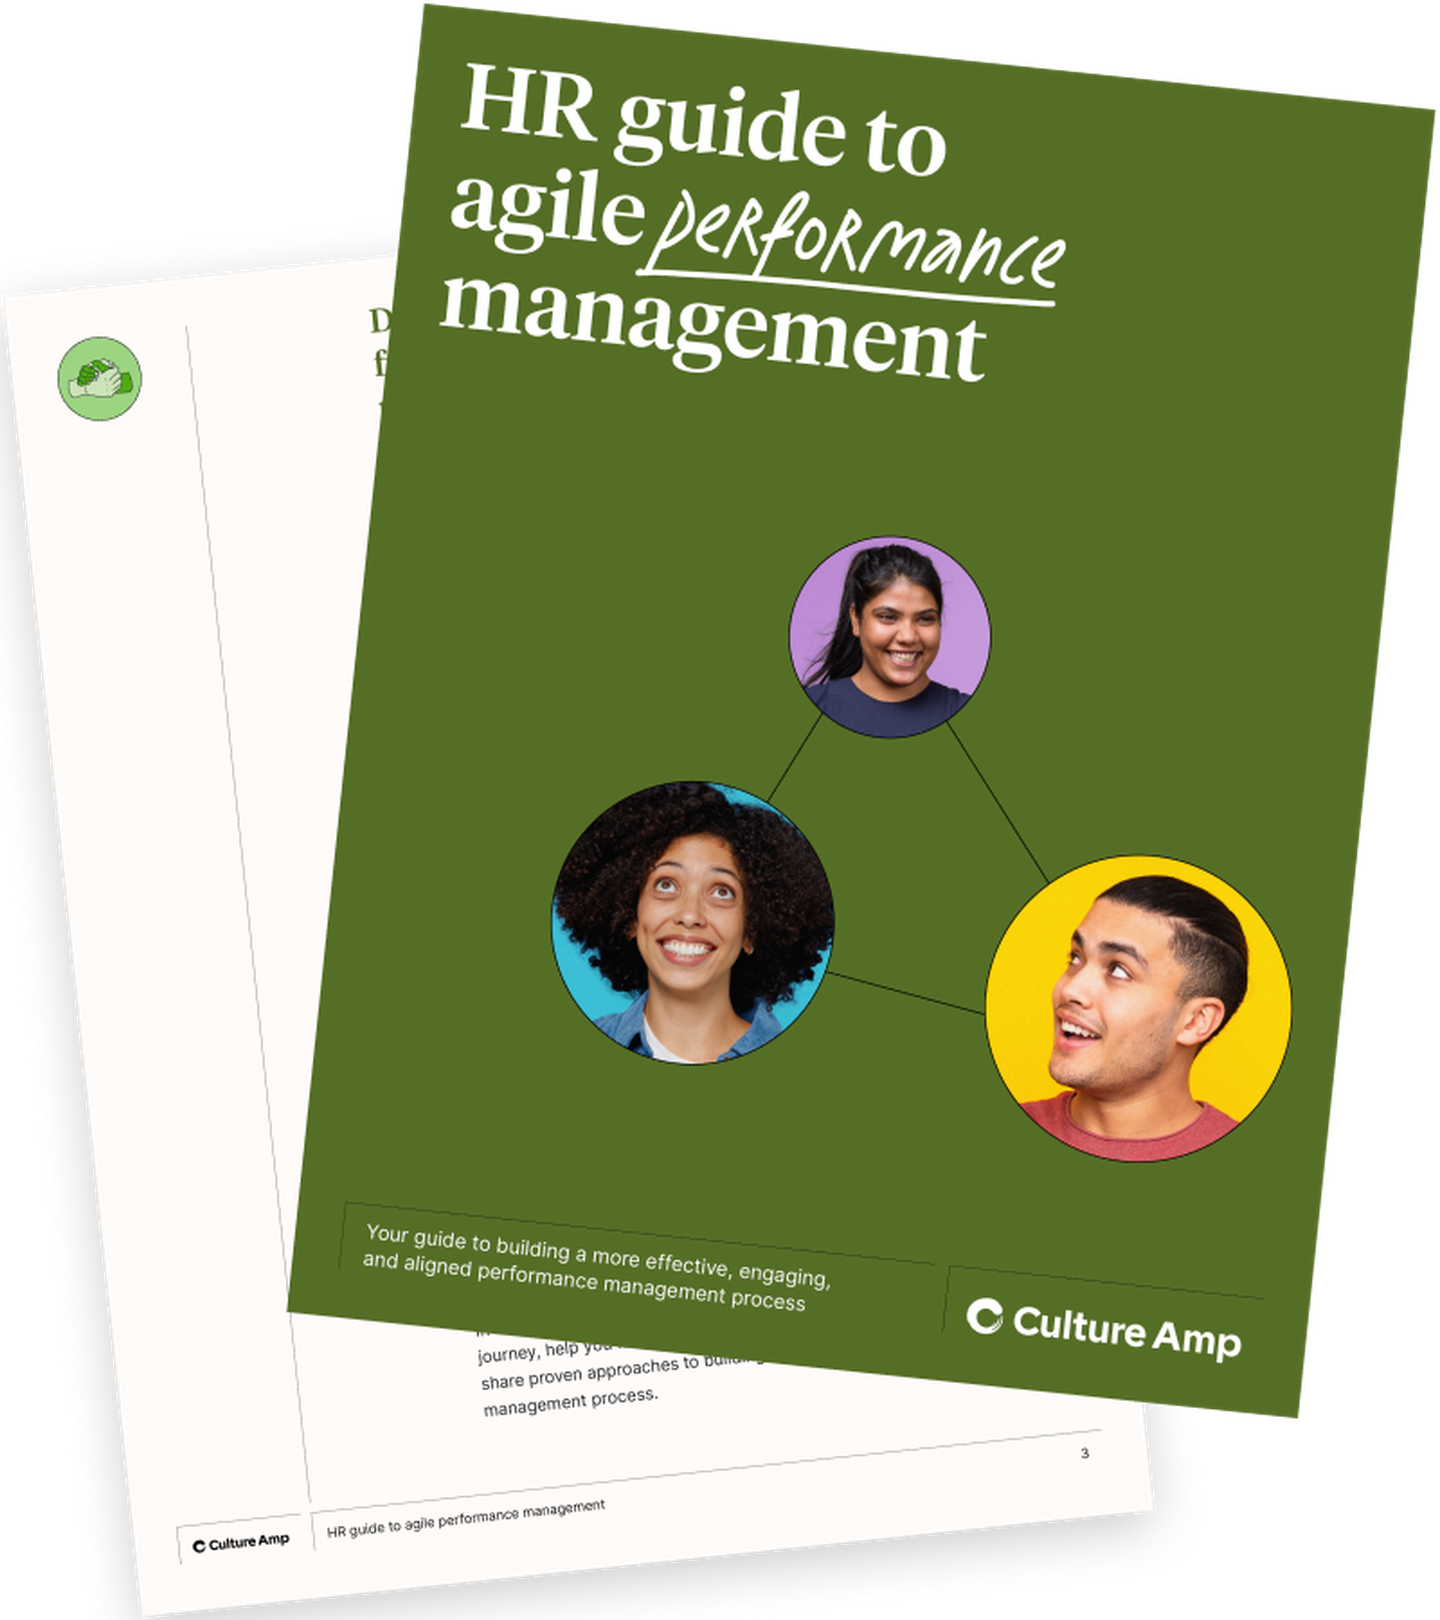 Agile performance management guide